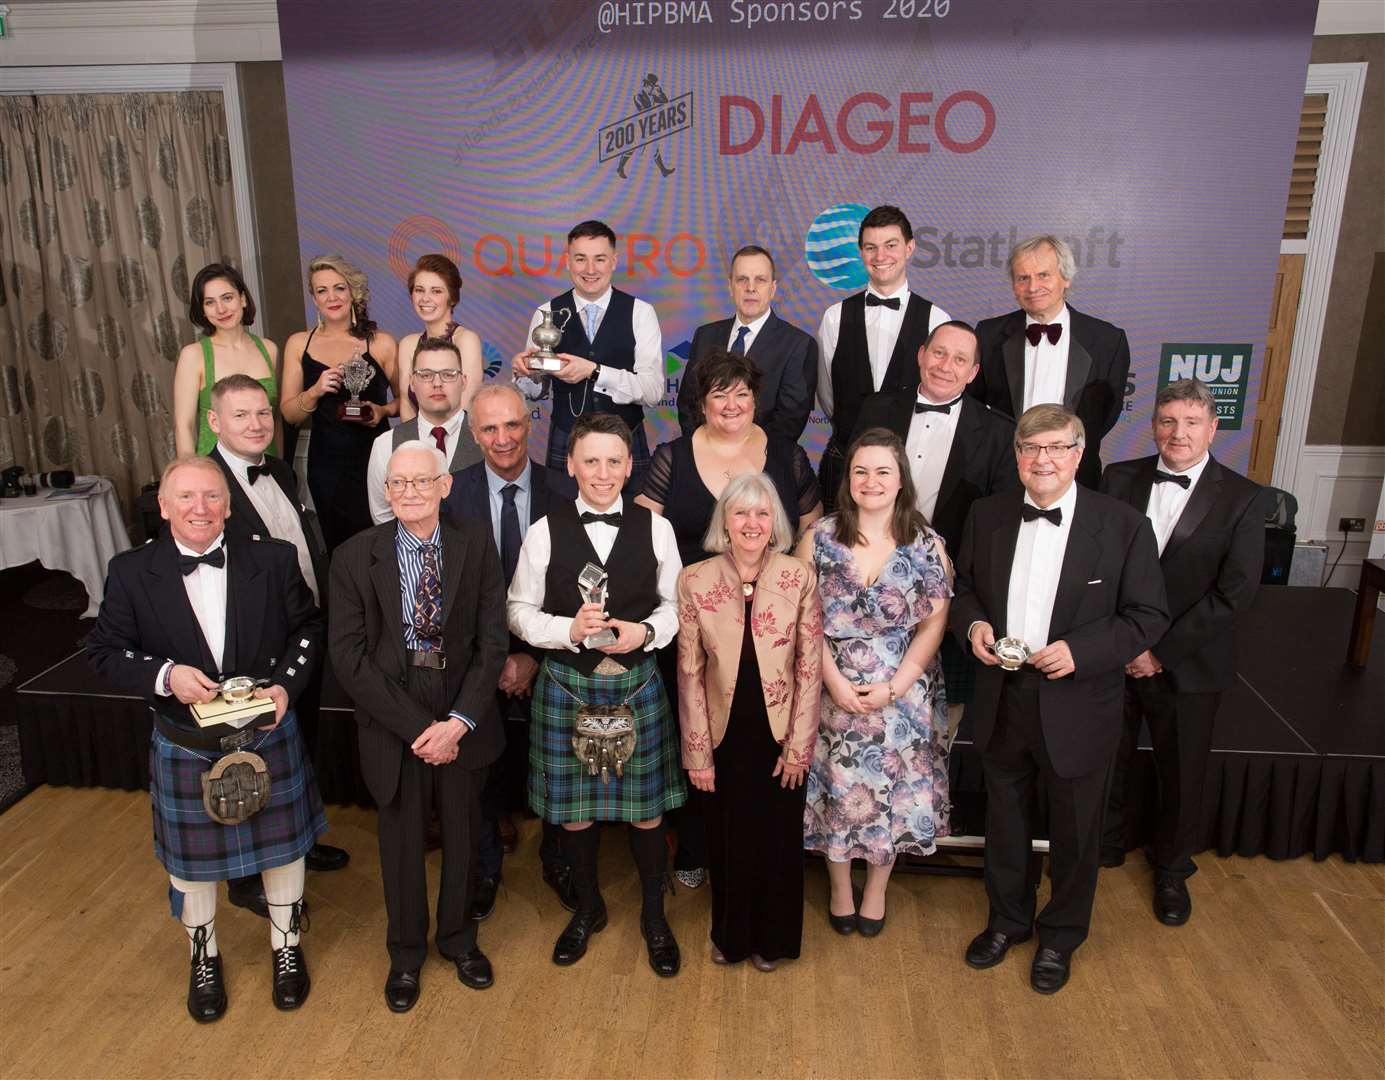 The winners of the press awards including Val Sweeney (front, centre), Louise Glen (directly behind her), Callum Mackay (directly behind Louise) and Eric Cormack (front, left).